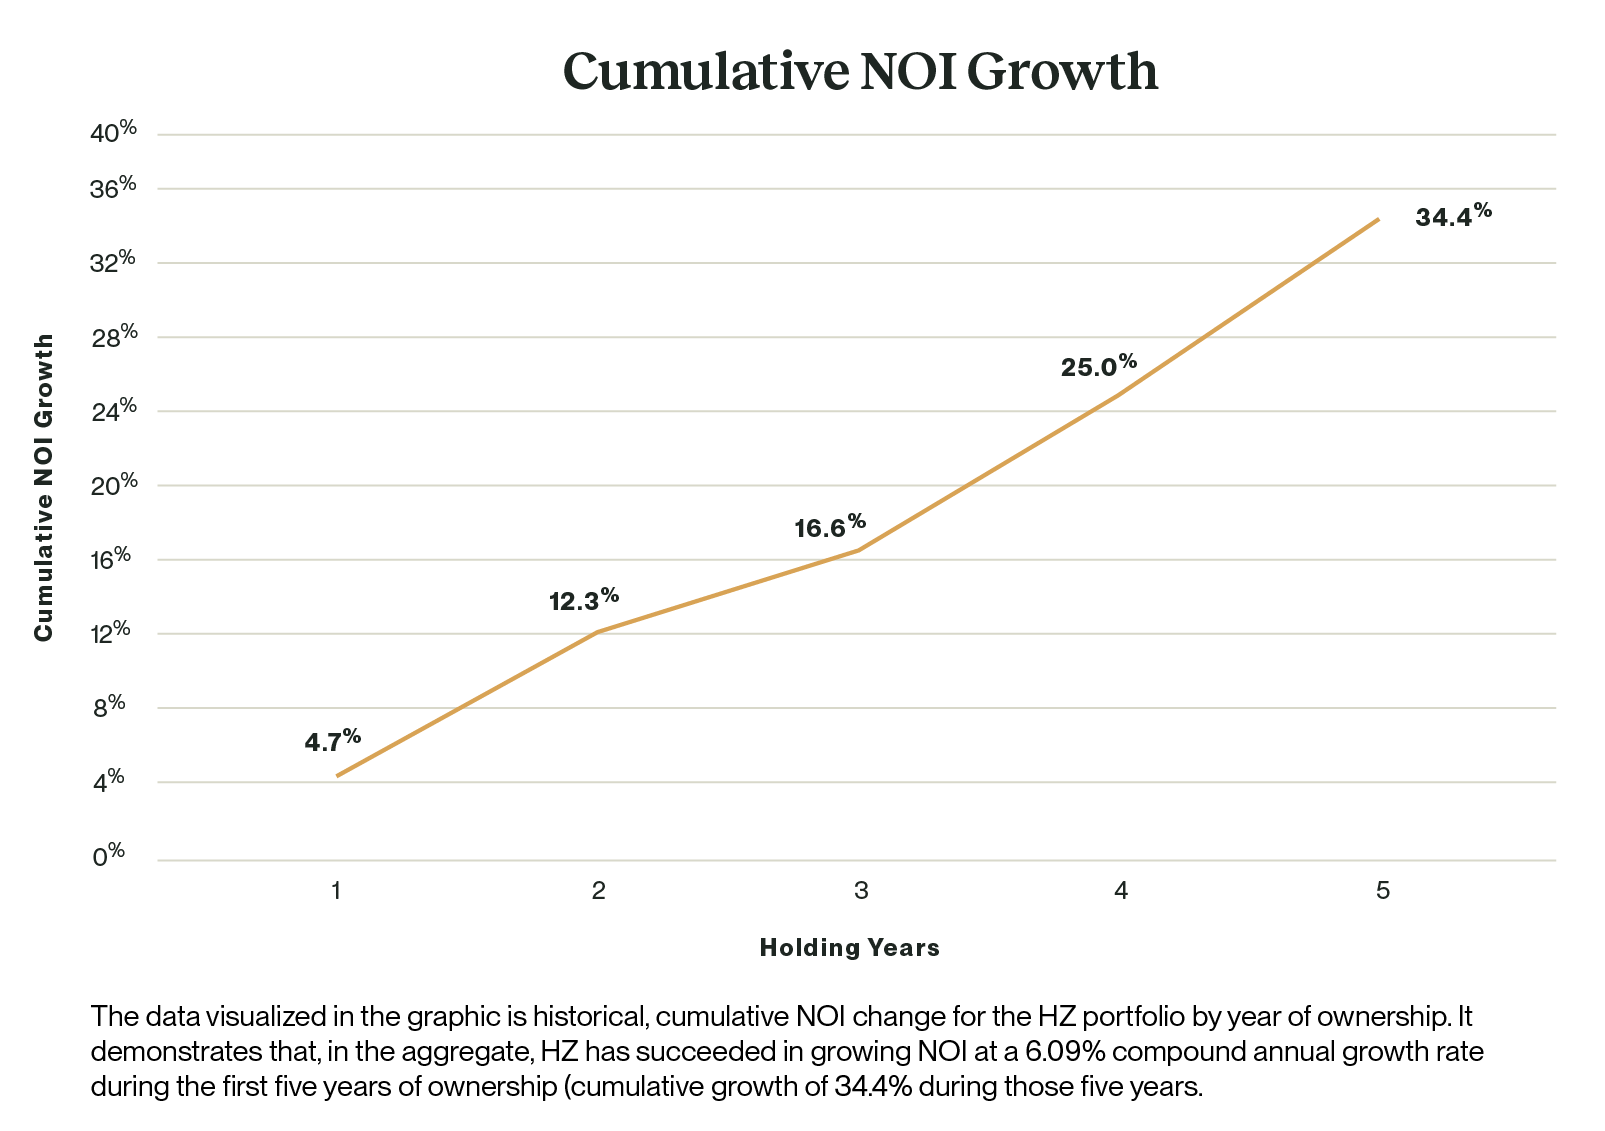 Cumulative NOI Growth line graph comparing Cumulative NOI Growth over Holding Years